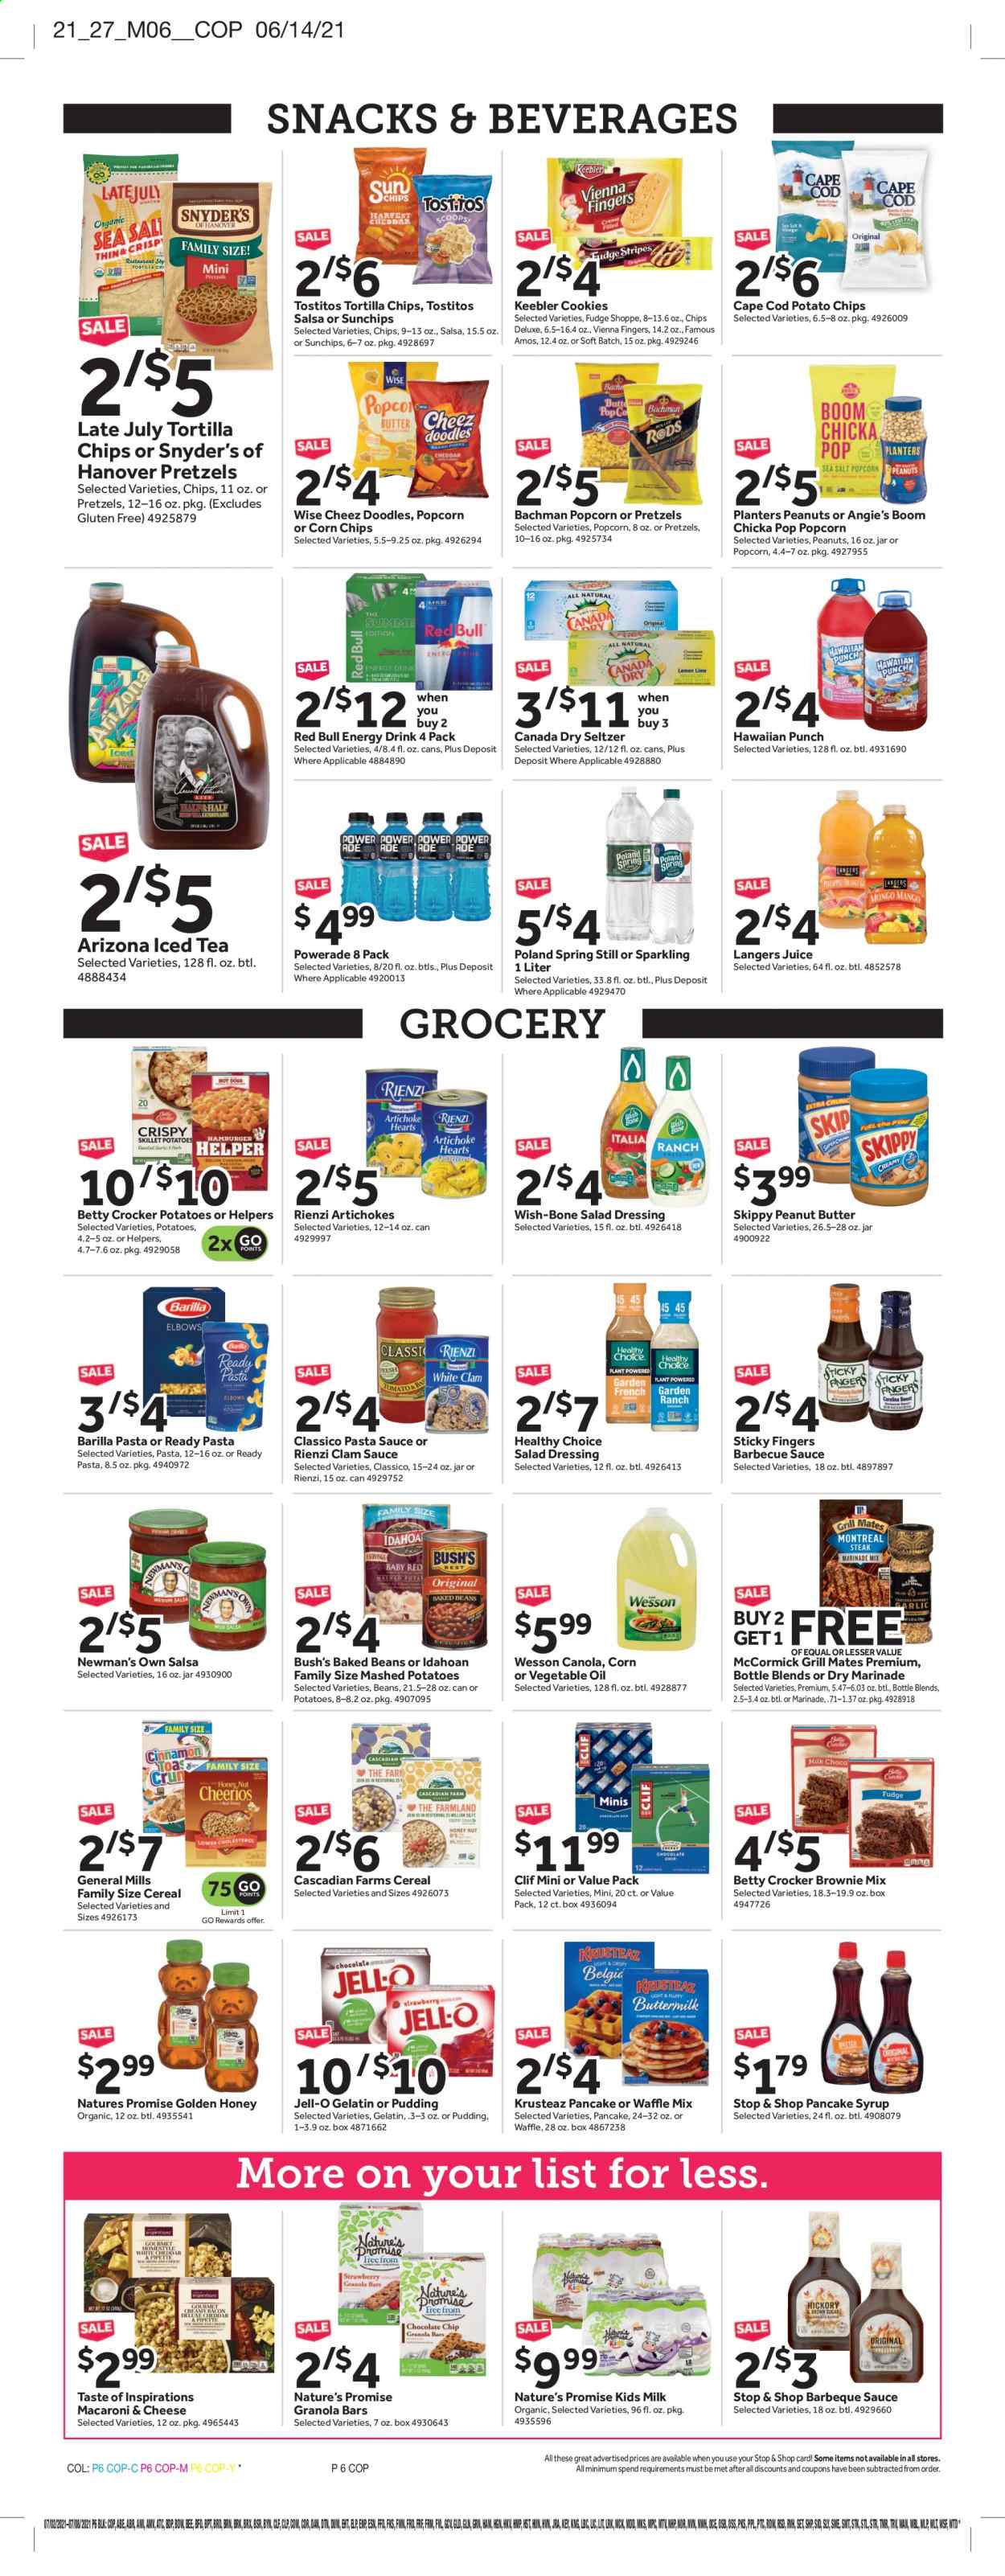 thumbnail - Stop & Shop Flyer - 07/02/2021 - 07/08/2021 - Sales products - pretzels, Nature’s Promise, brownie mix, artichoke, clams, cod, macaroni & cheese, mashed potatoes, pasta sauce, Barilla, Healthy Choice, ham, pudding, milk, cookies, fudge, vienna fingers, snack, Keebler, tortilla chips, potato chips, chips, corn chips, popcorn, Tostitos, Jell-O, baked beans, cereals, granola bar, BBQ sauce, salad dressing, dressing, salsa, marinade, Classico, oil, honey, peanut butter, pancake syrup, syrup, peanuts, Planters, Canada Dry, Powerade, juice, energy drink, ice tea, Red Bull, AriZona, seltzer water. Page 6.